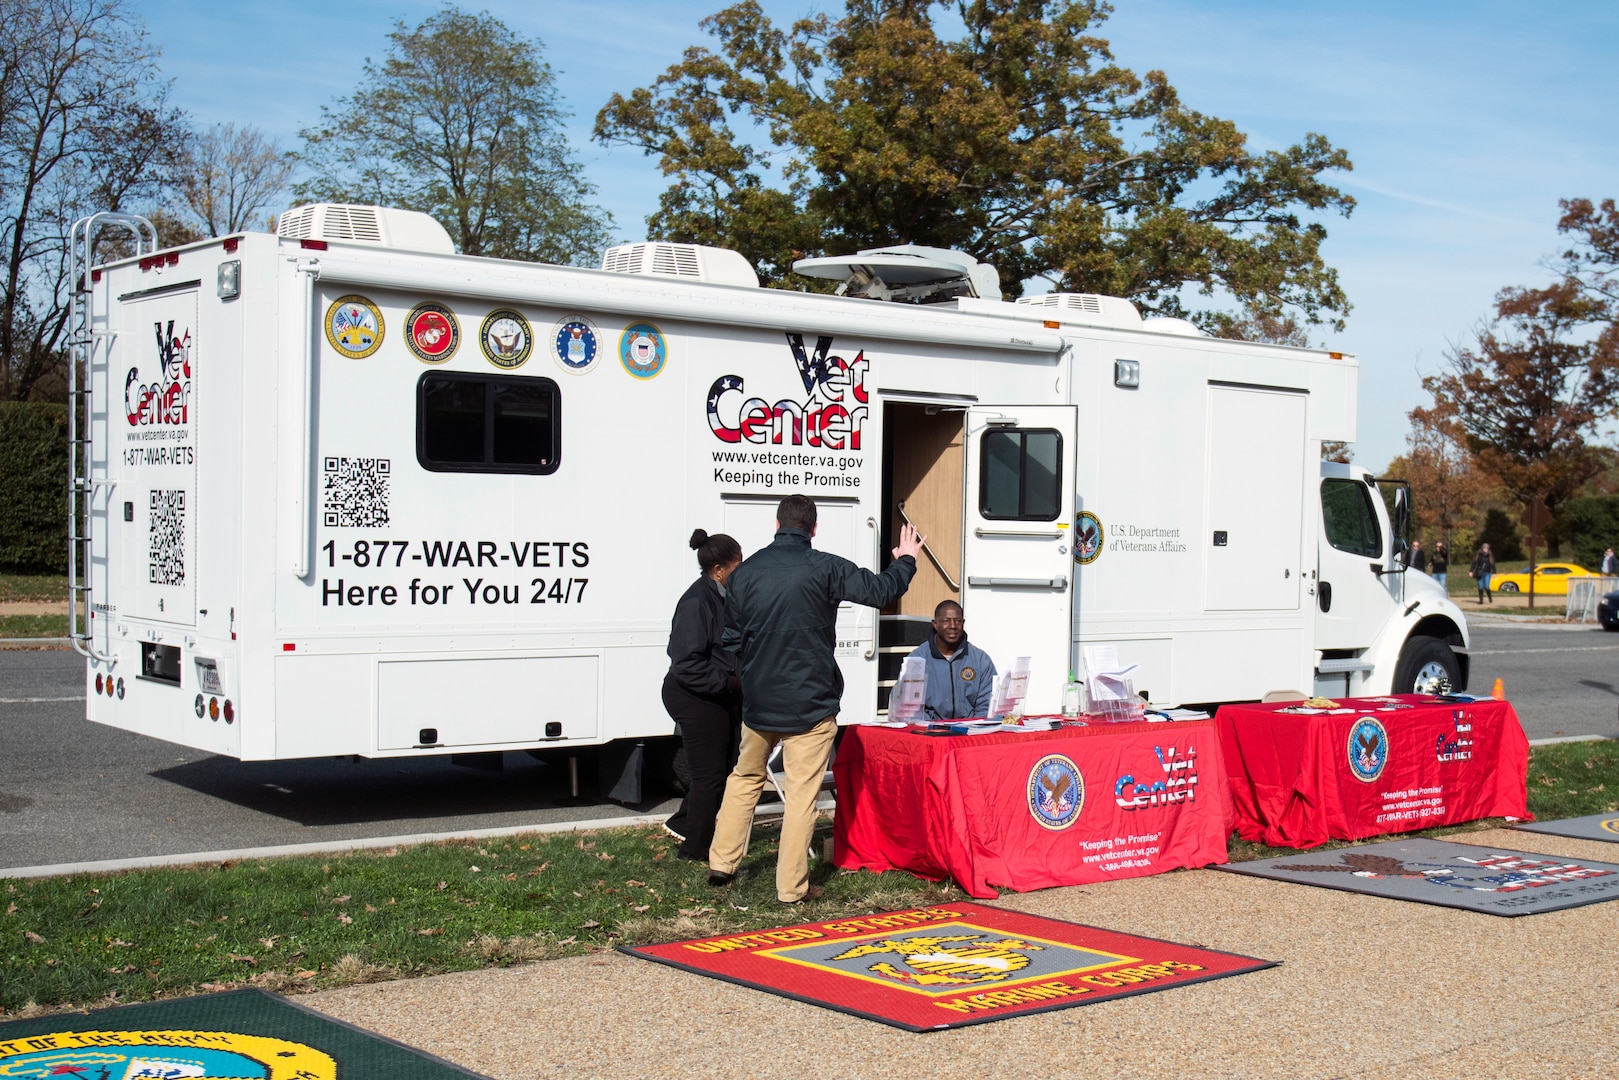 A Vet Centers mobile unit on Memorial Avenue on Veterans Day at Arlington National Cemetery, Arlington, Virginia, Nov. 11, 2017.  Vet Centers are community based and part of the Department of Veterans Affairs, providing support to all veterans of the armed forces.